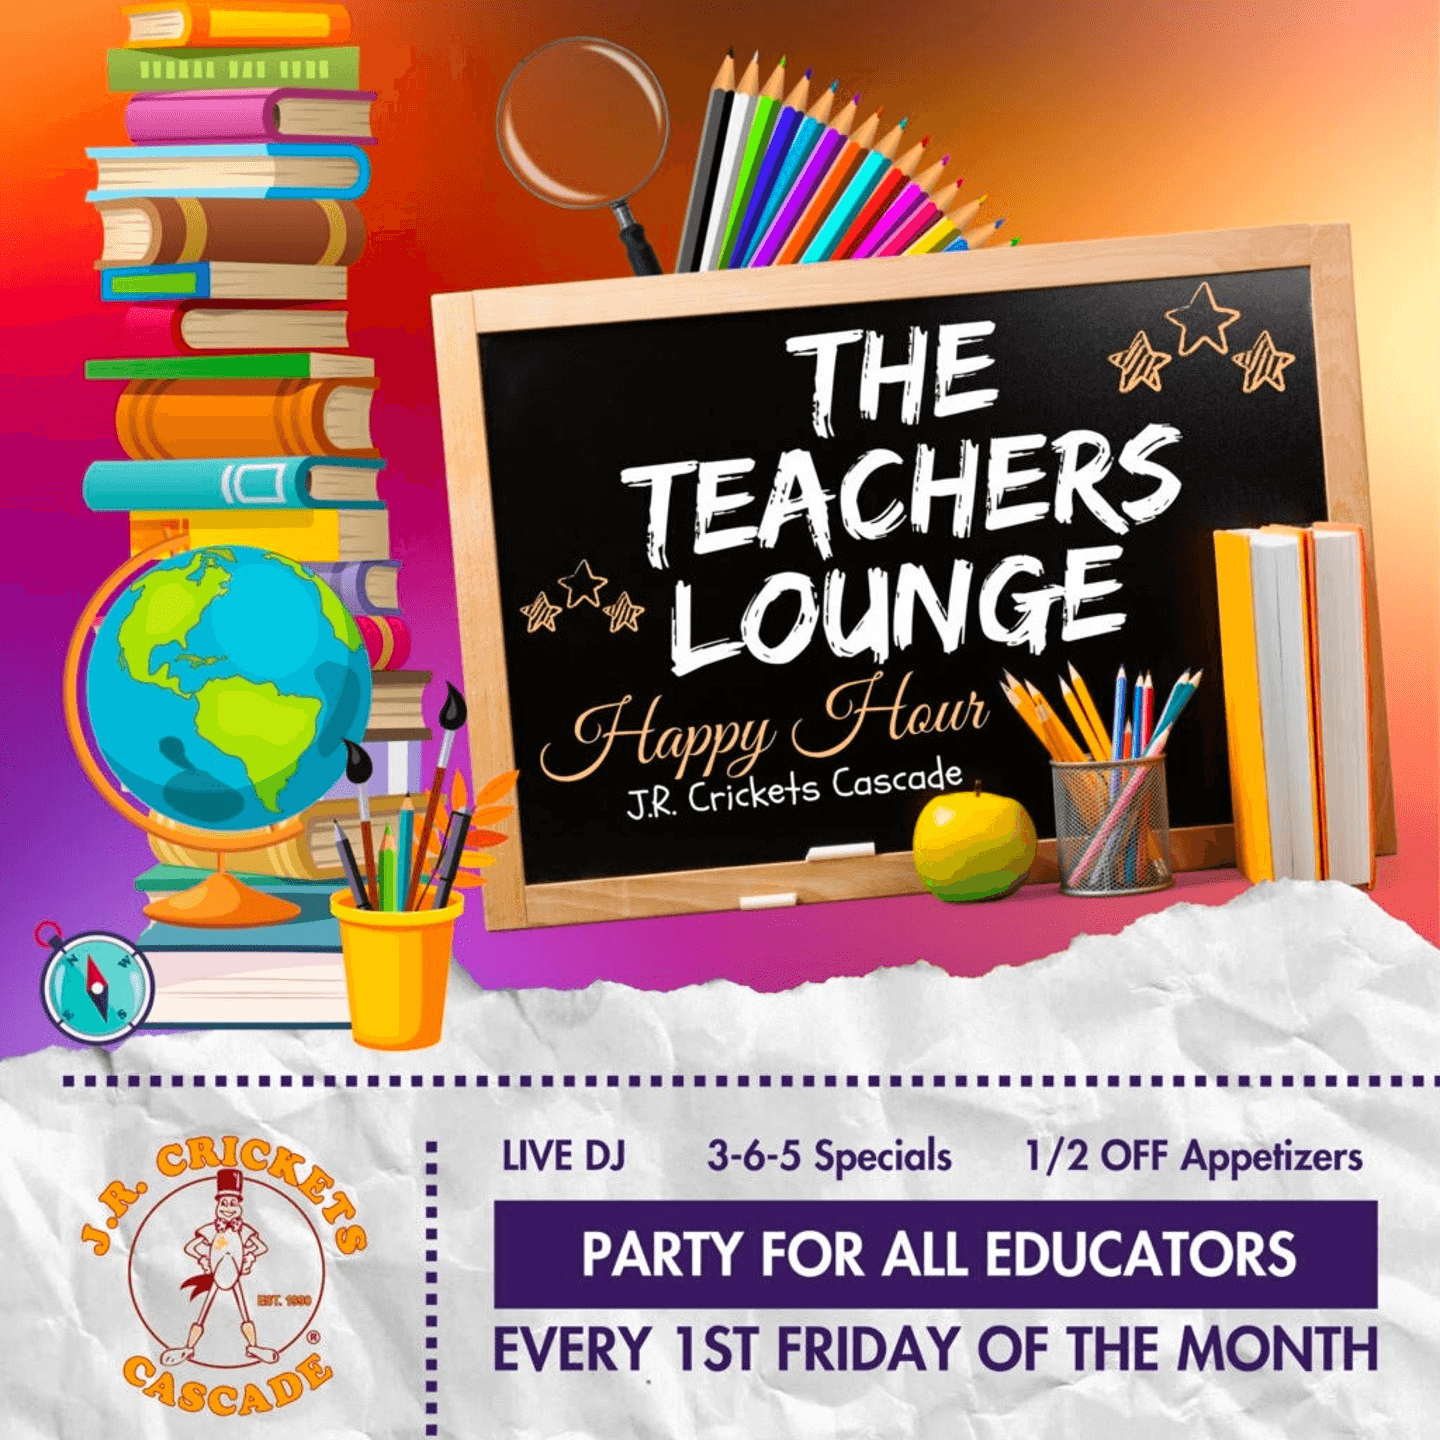 Enjoy our Happy Hours for All Educators!🎉